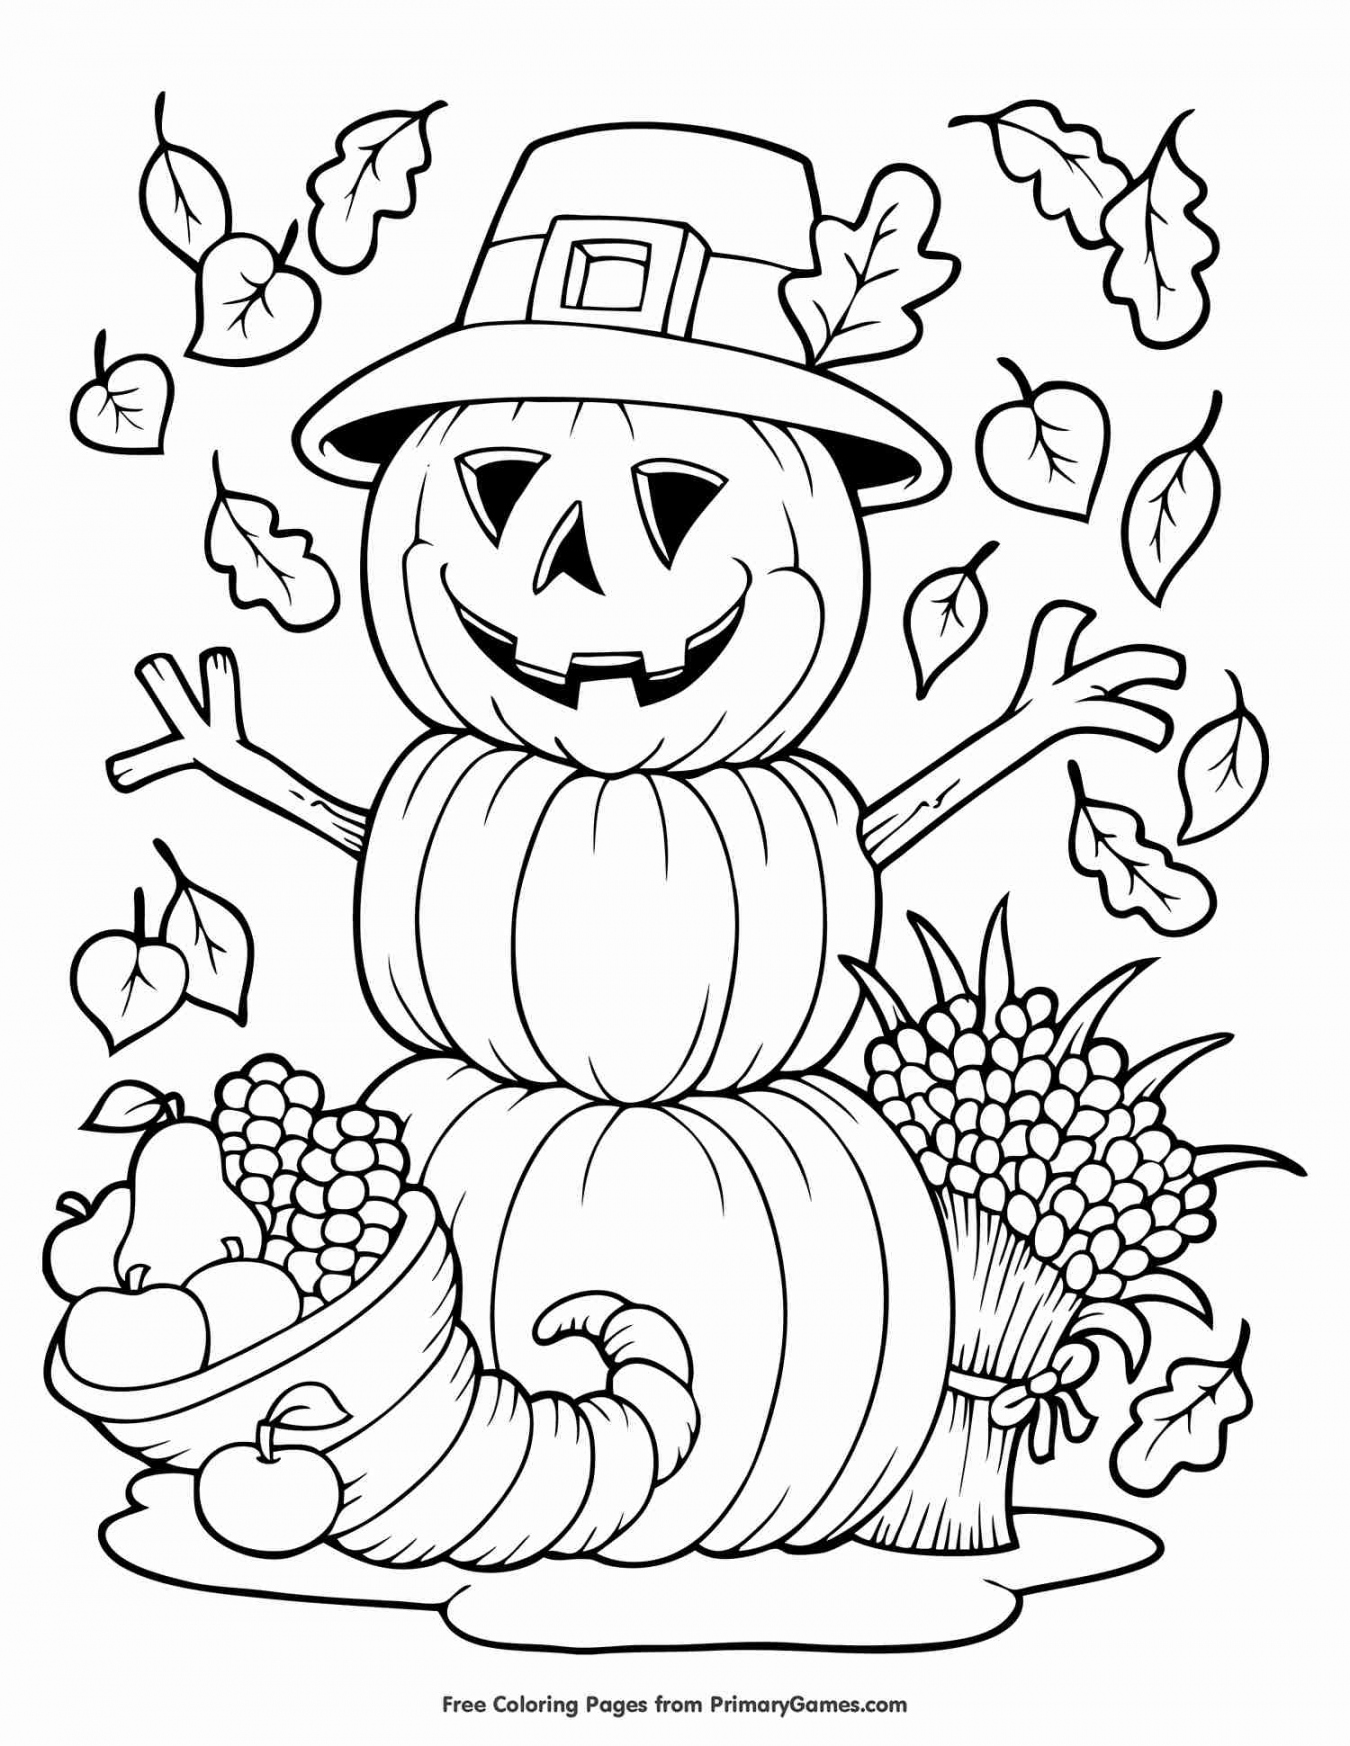 Places to Find Free Autumn and Fall Coloring Pages - FREE Printables - Free Fall Printable Coloring Pages